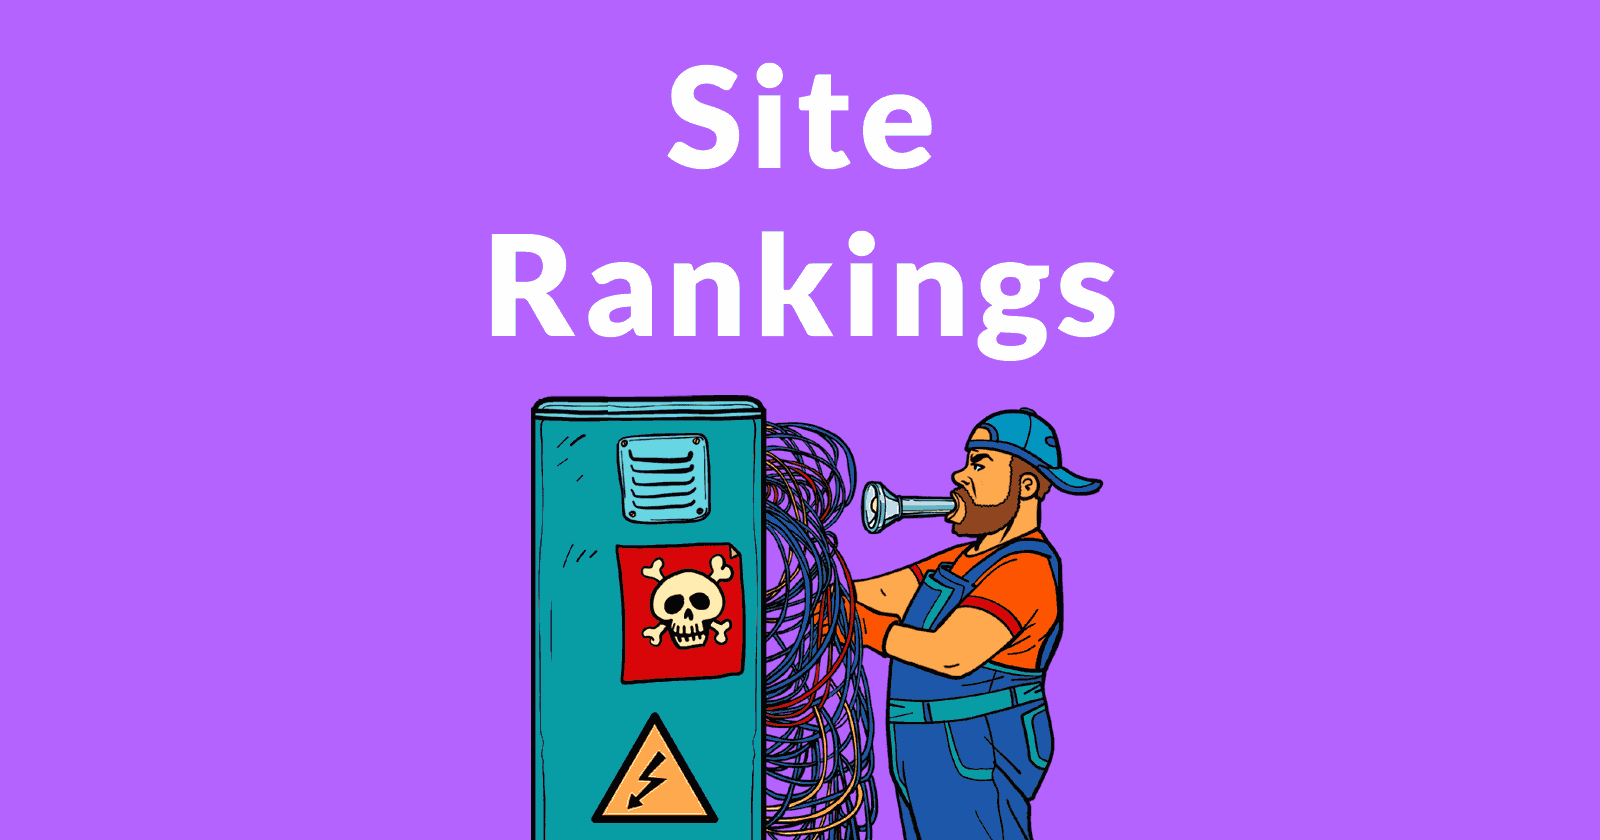 Image of a technician making repairs and the words, "Site Rankings"